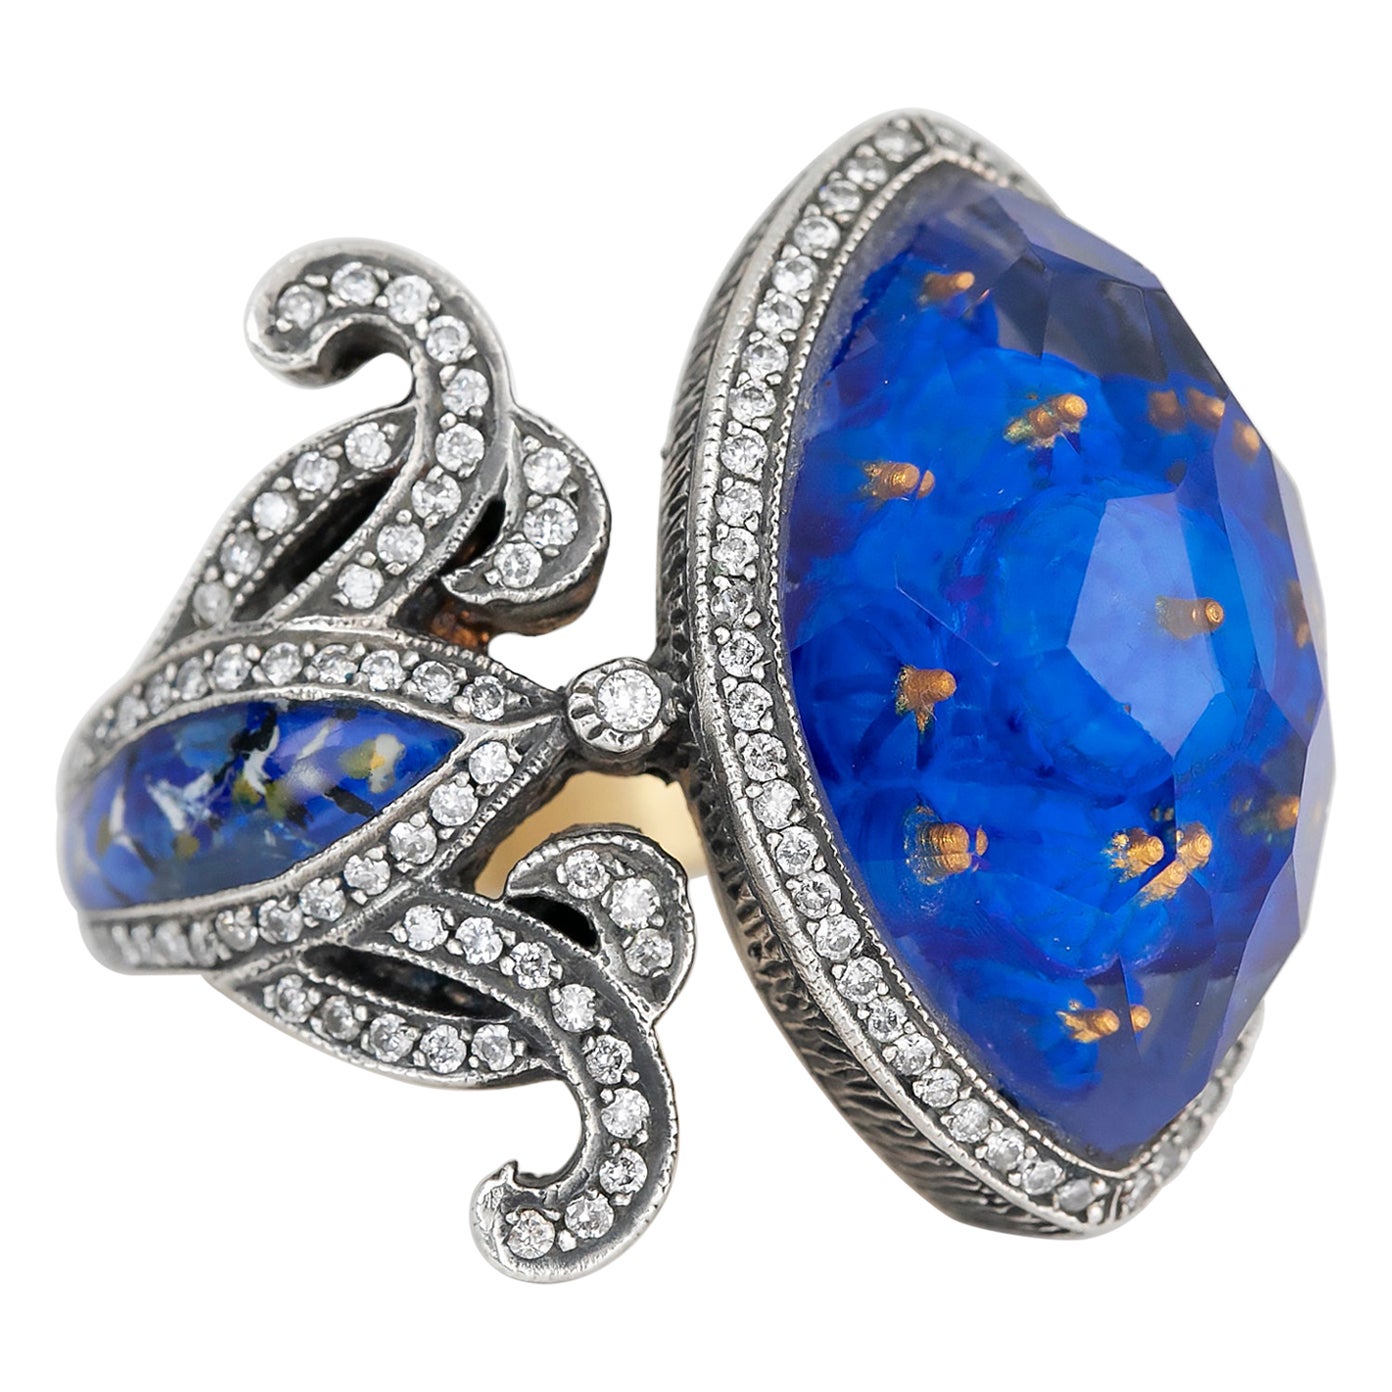 24K Gold & 925K Silver Carved Blue Mosque Enganed Ring with 0.57 ct Diamond